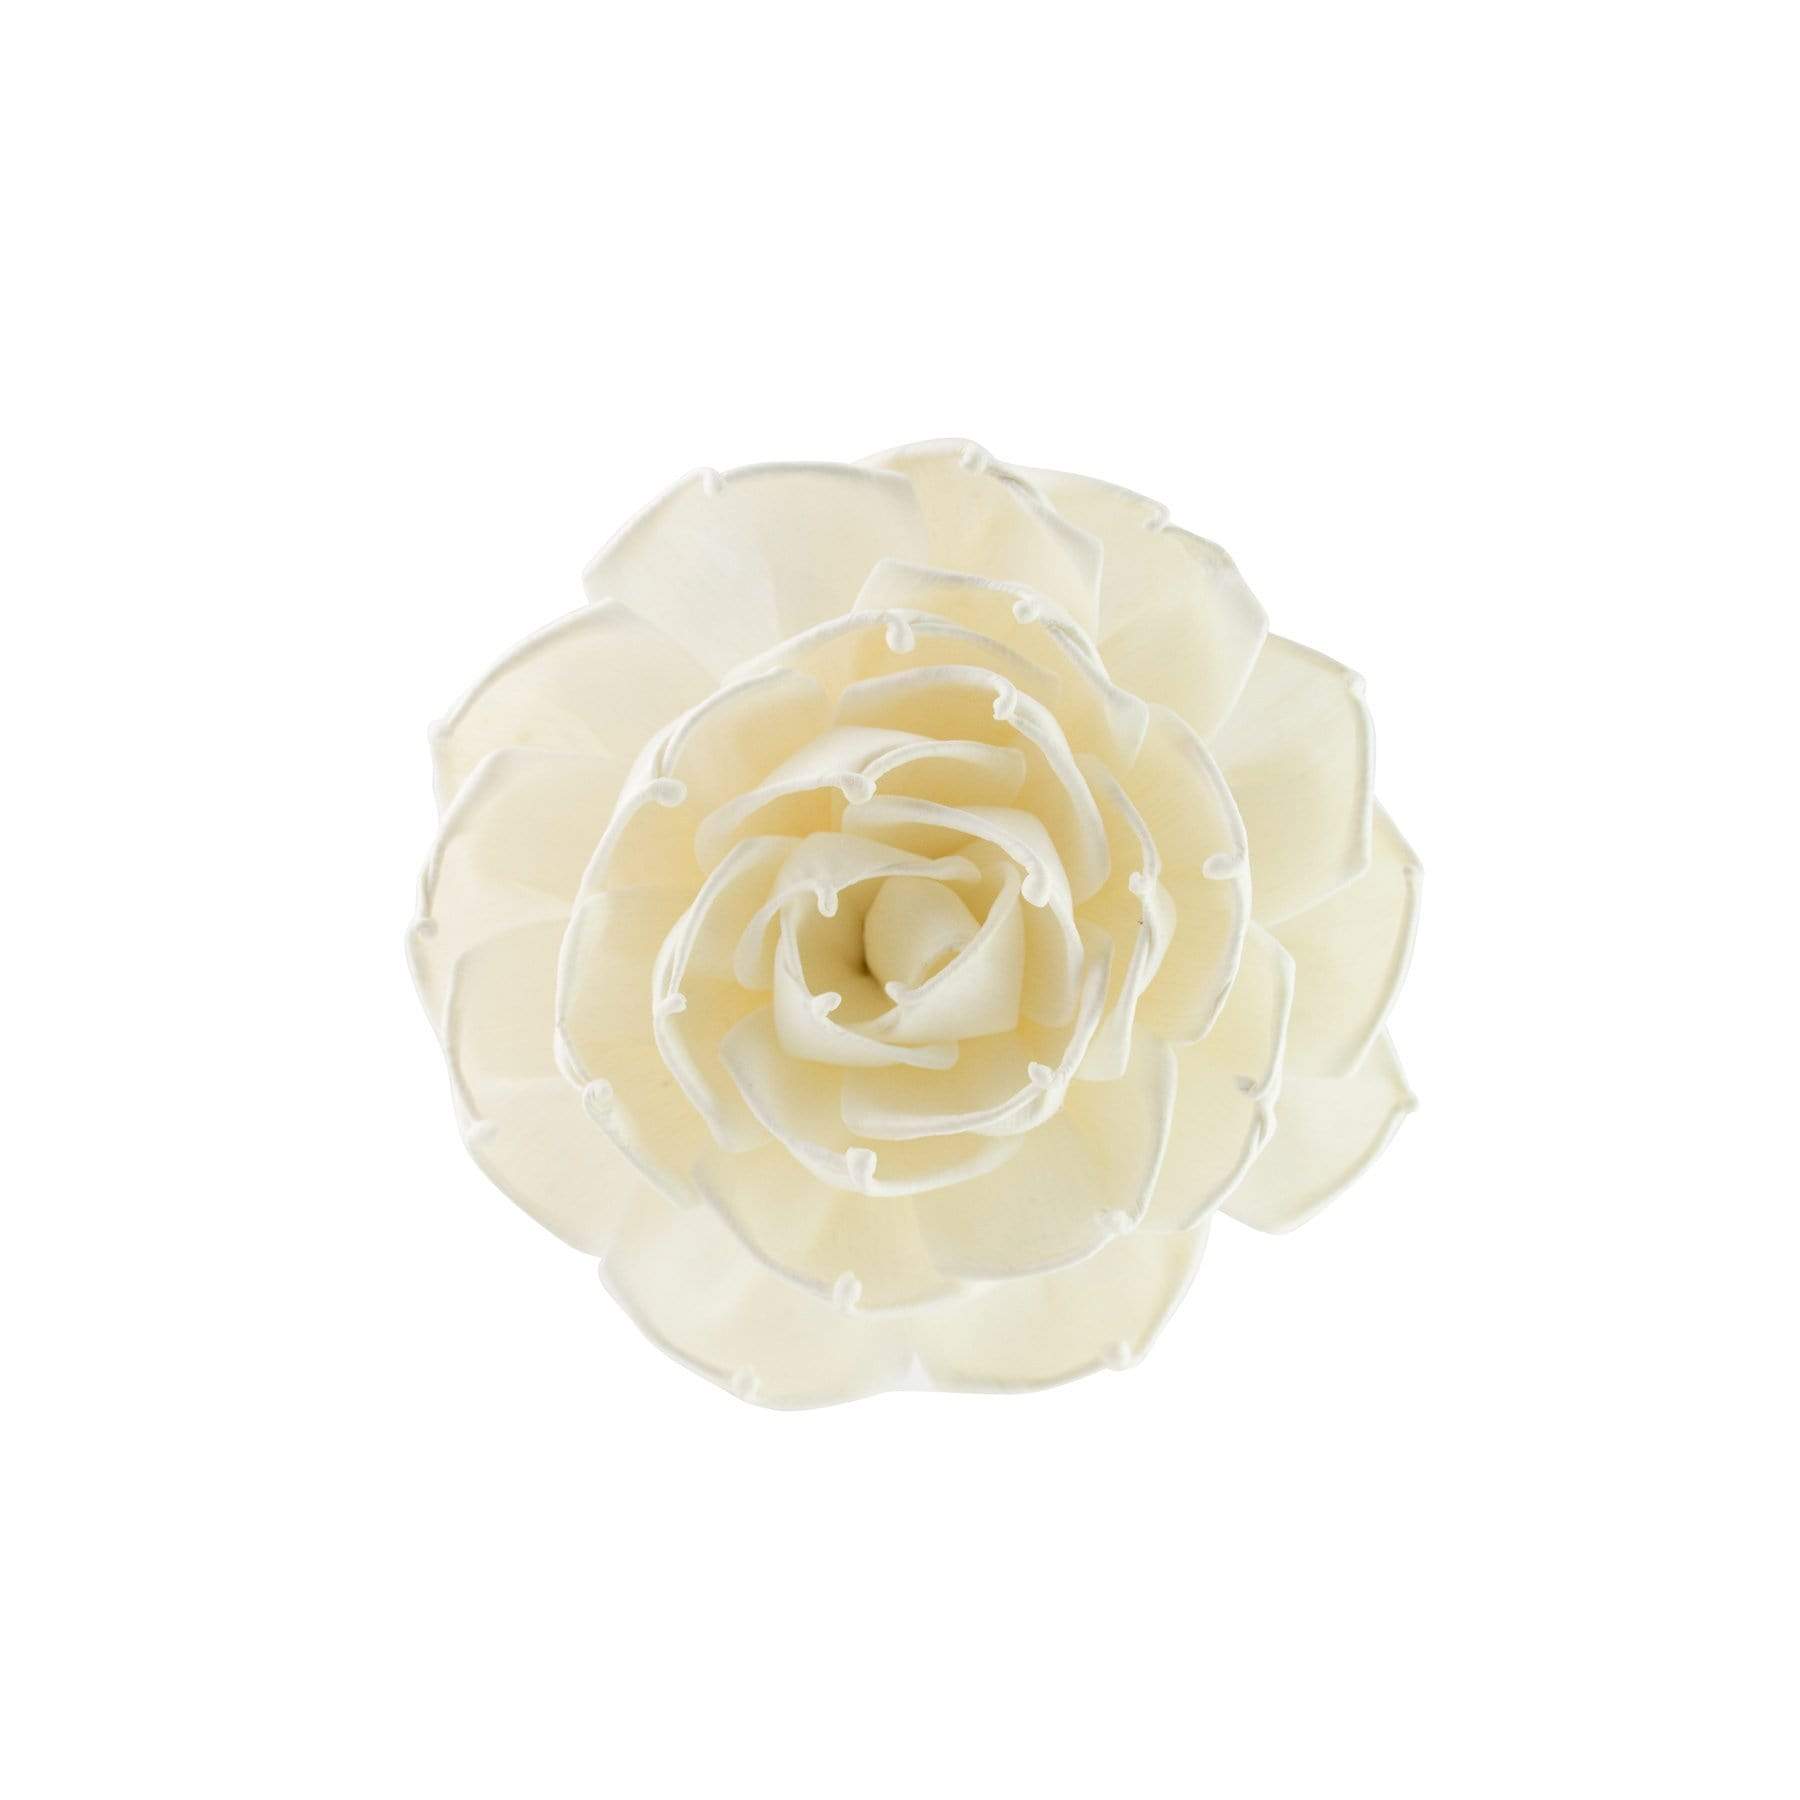 HYSSES Home Scents 5" Solar Flower Diffuser Refill - Rose